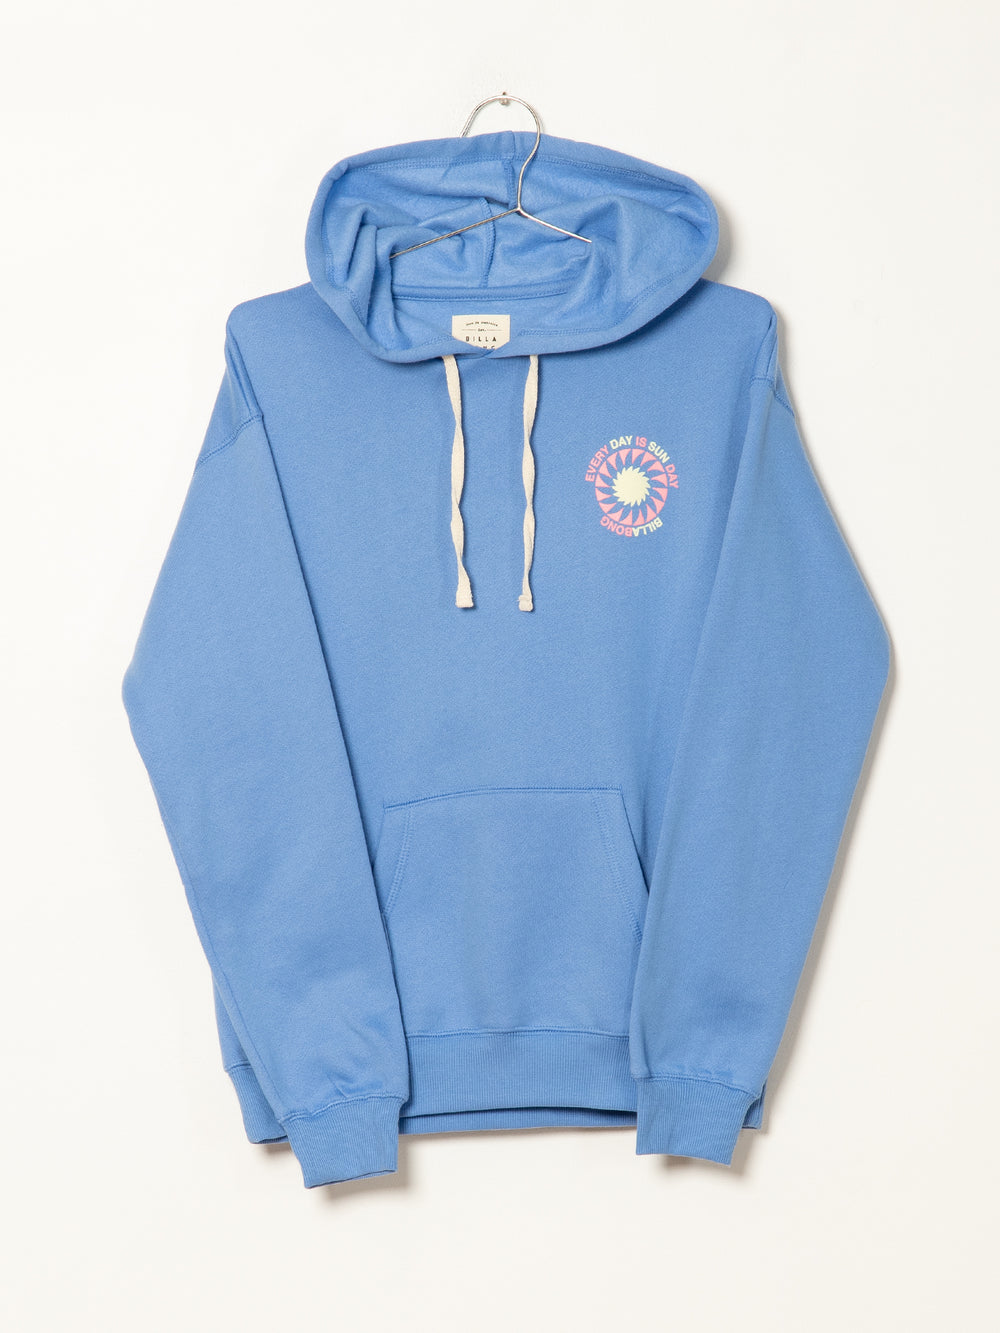 BILLABONG EVERYDAY IS SUNDAY HOODIE - DÉSTOCKAGE